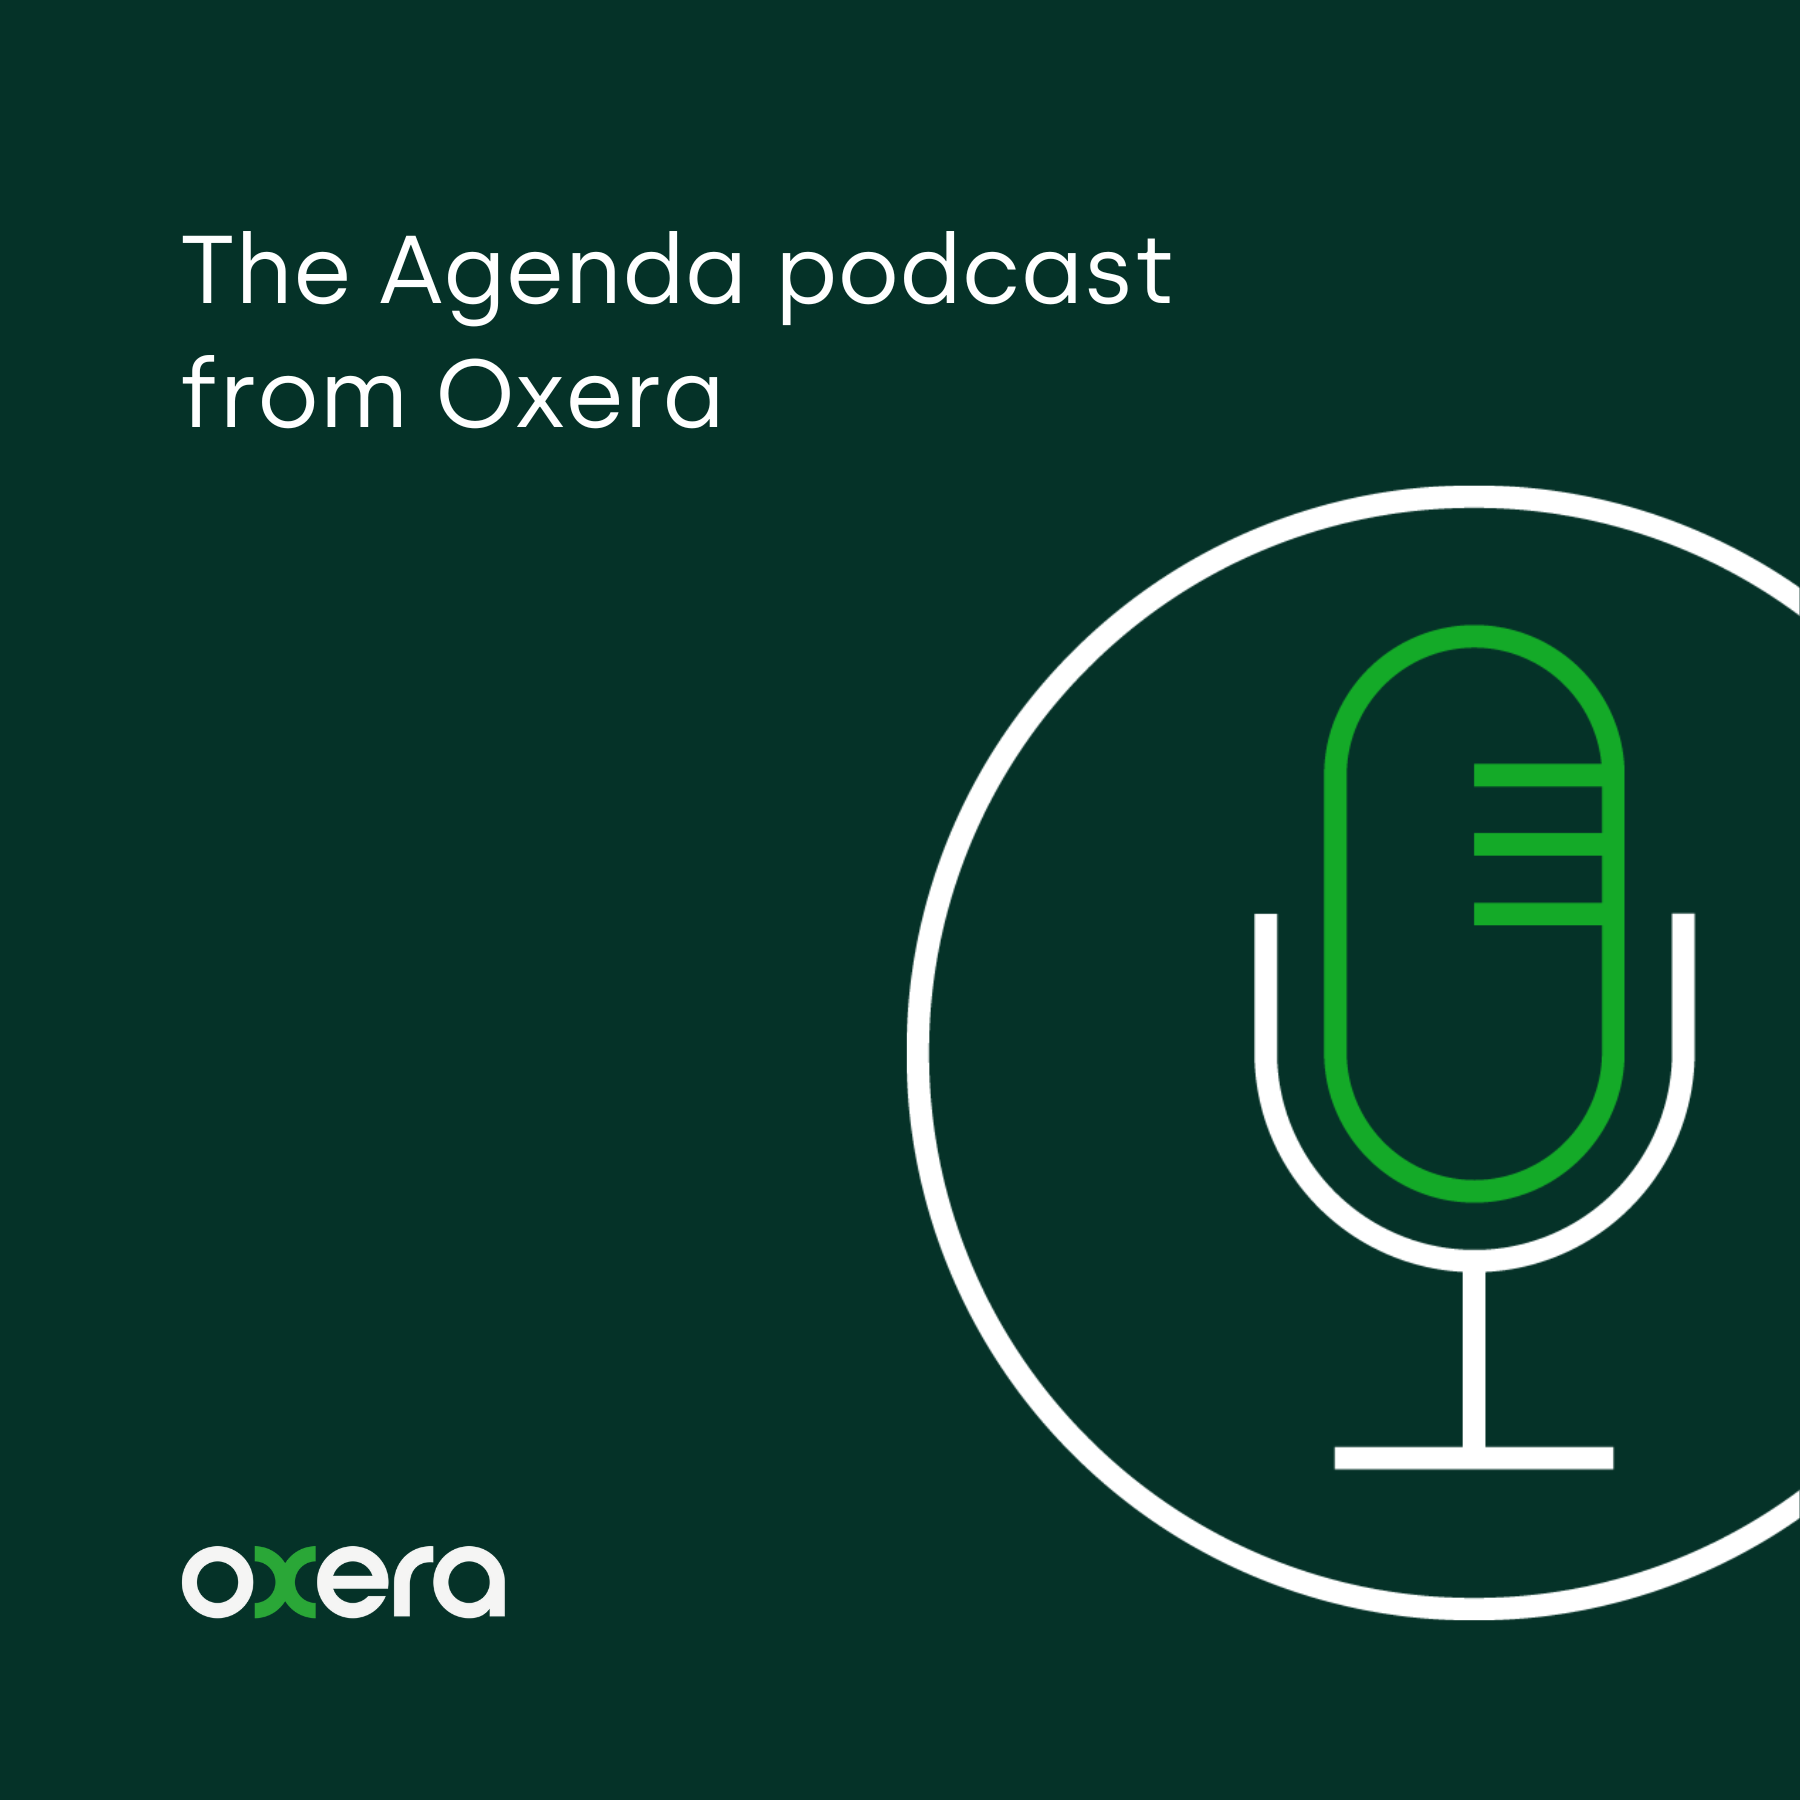 The Agenda podcast from Oxera